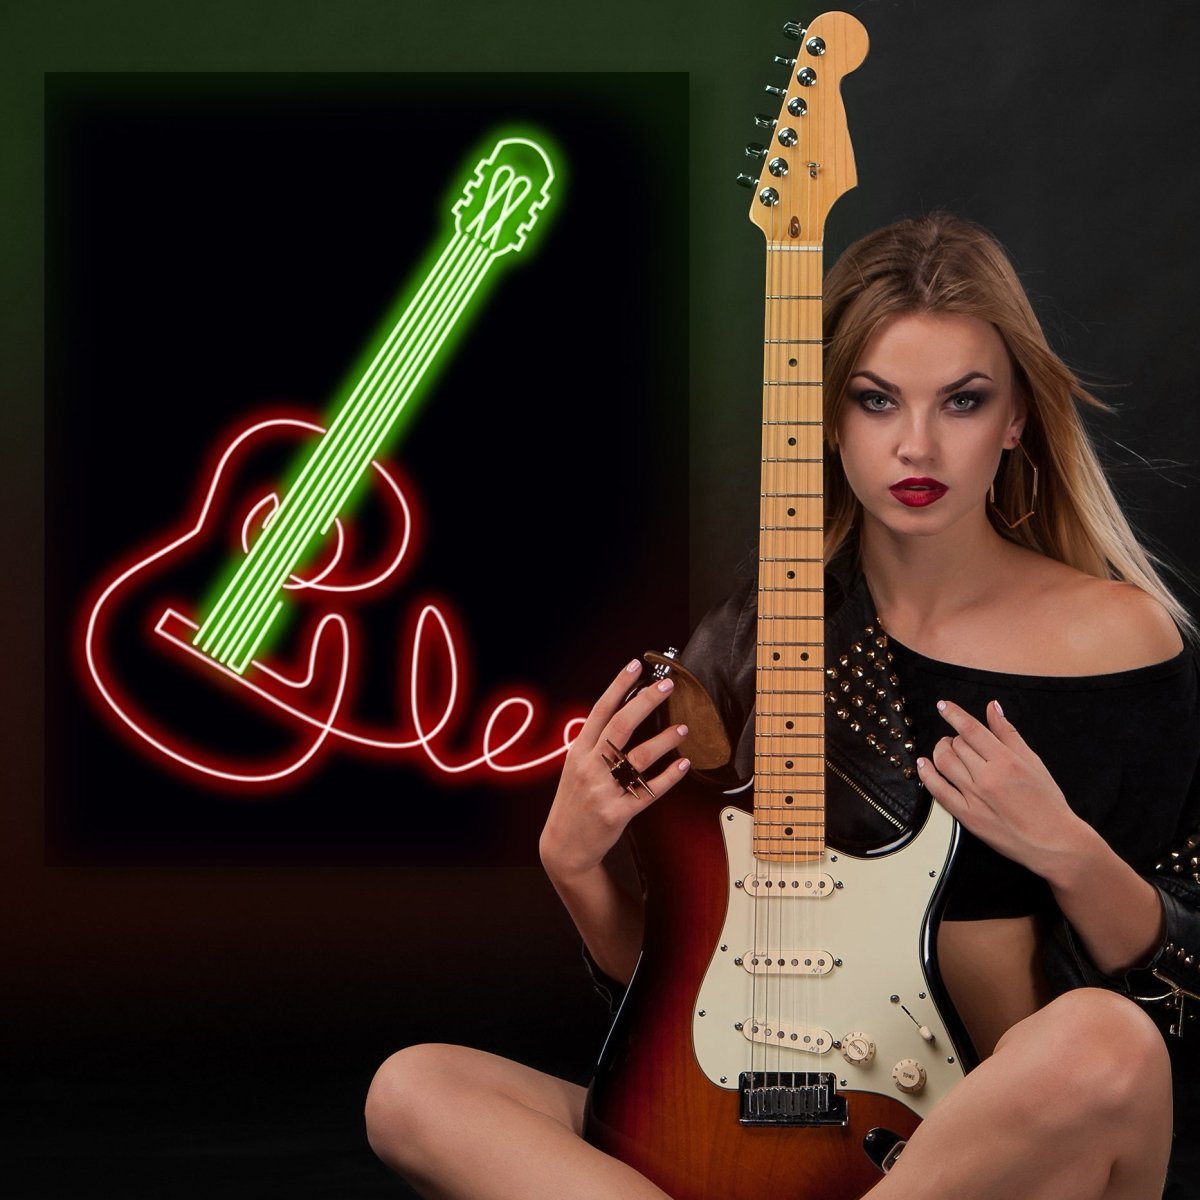 Personalised LED Neon Sign GUITAR 4 - madaboutneon